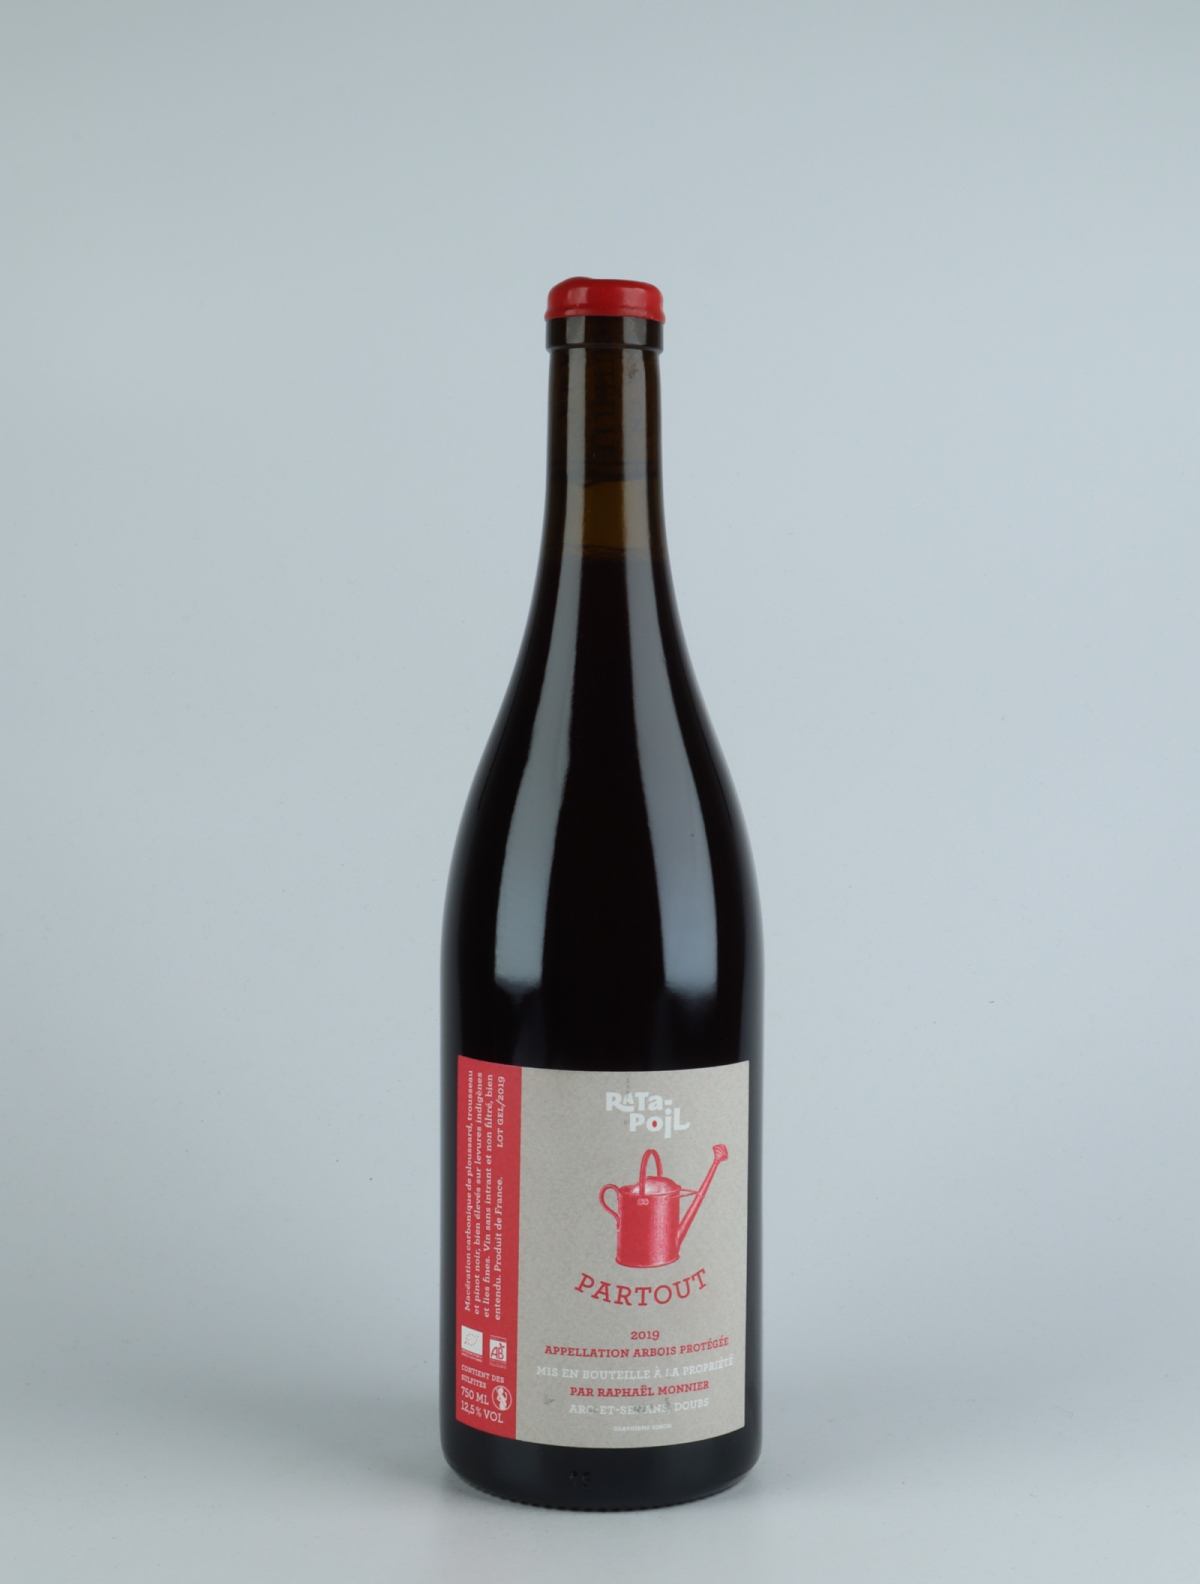 A bottle 2019 Partout Red wine from Domaine Ratapoil, Jura in France